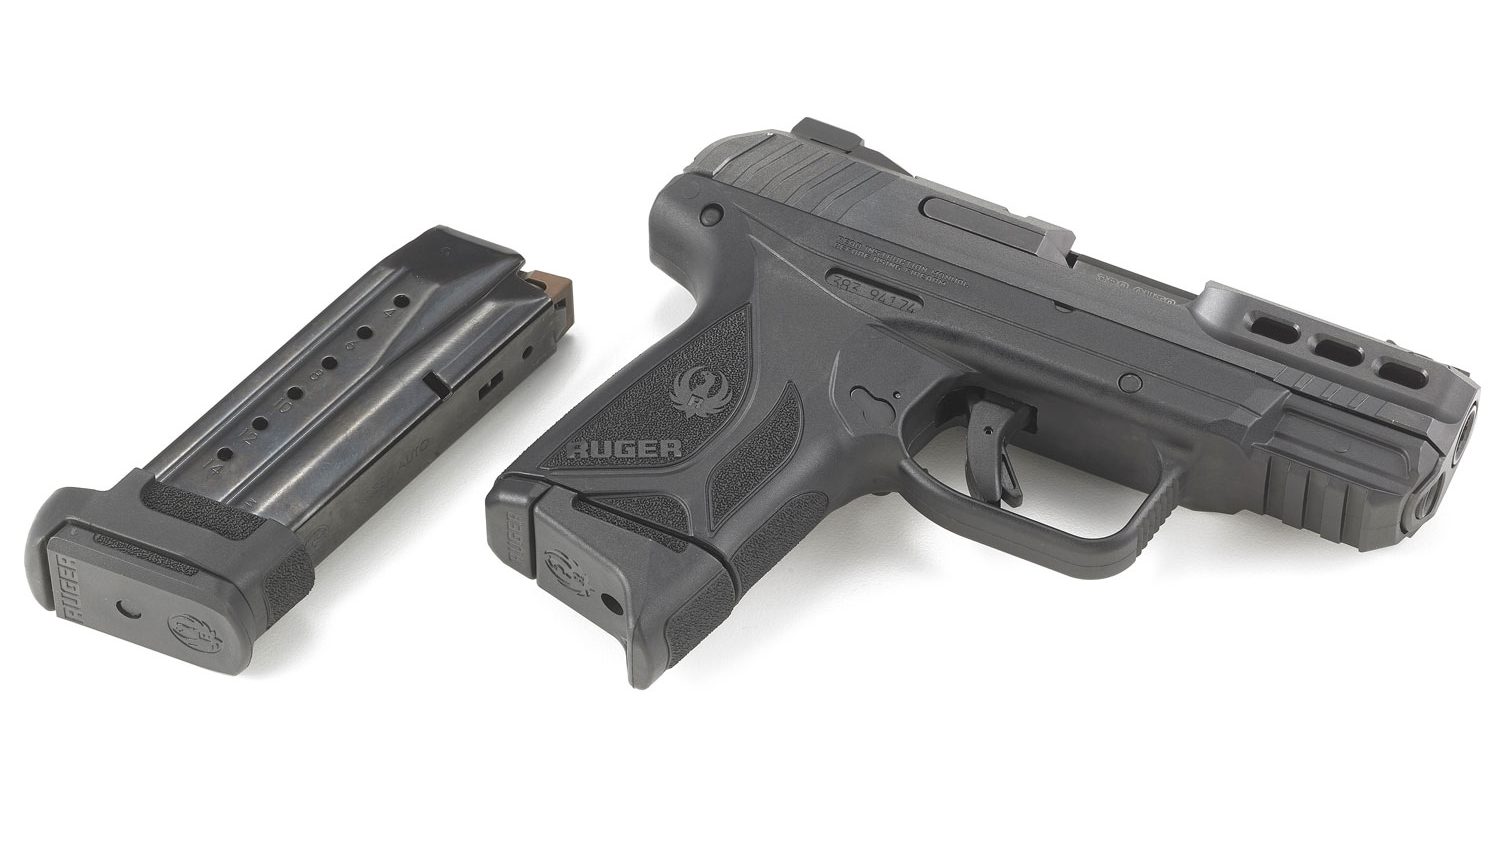 The New Ruger Security-380 - Ideally Sized, Modestly Priced, Full-Featured